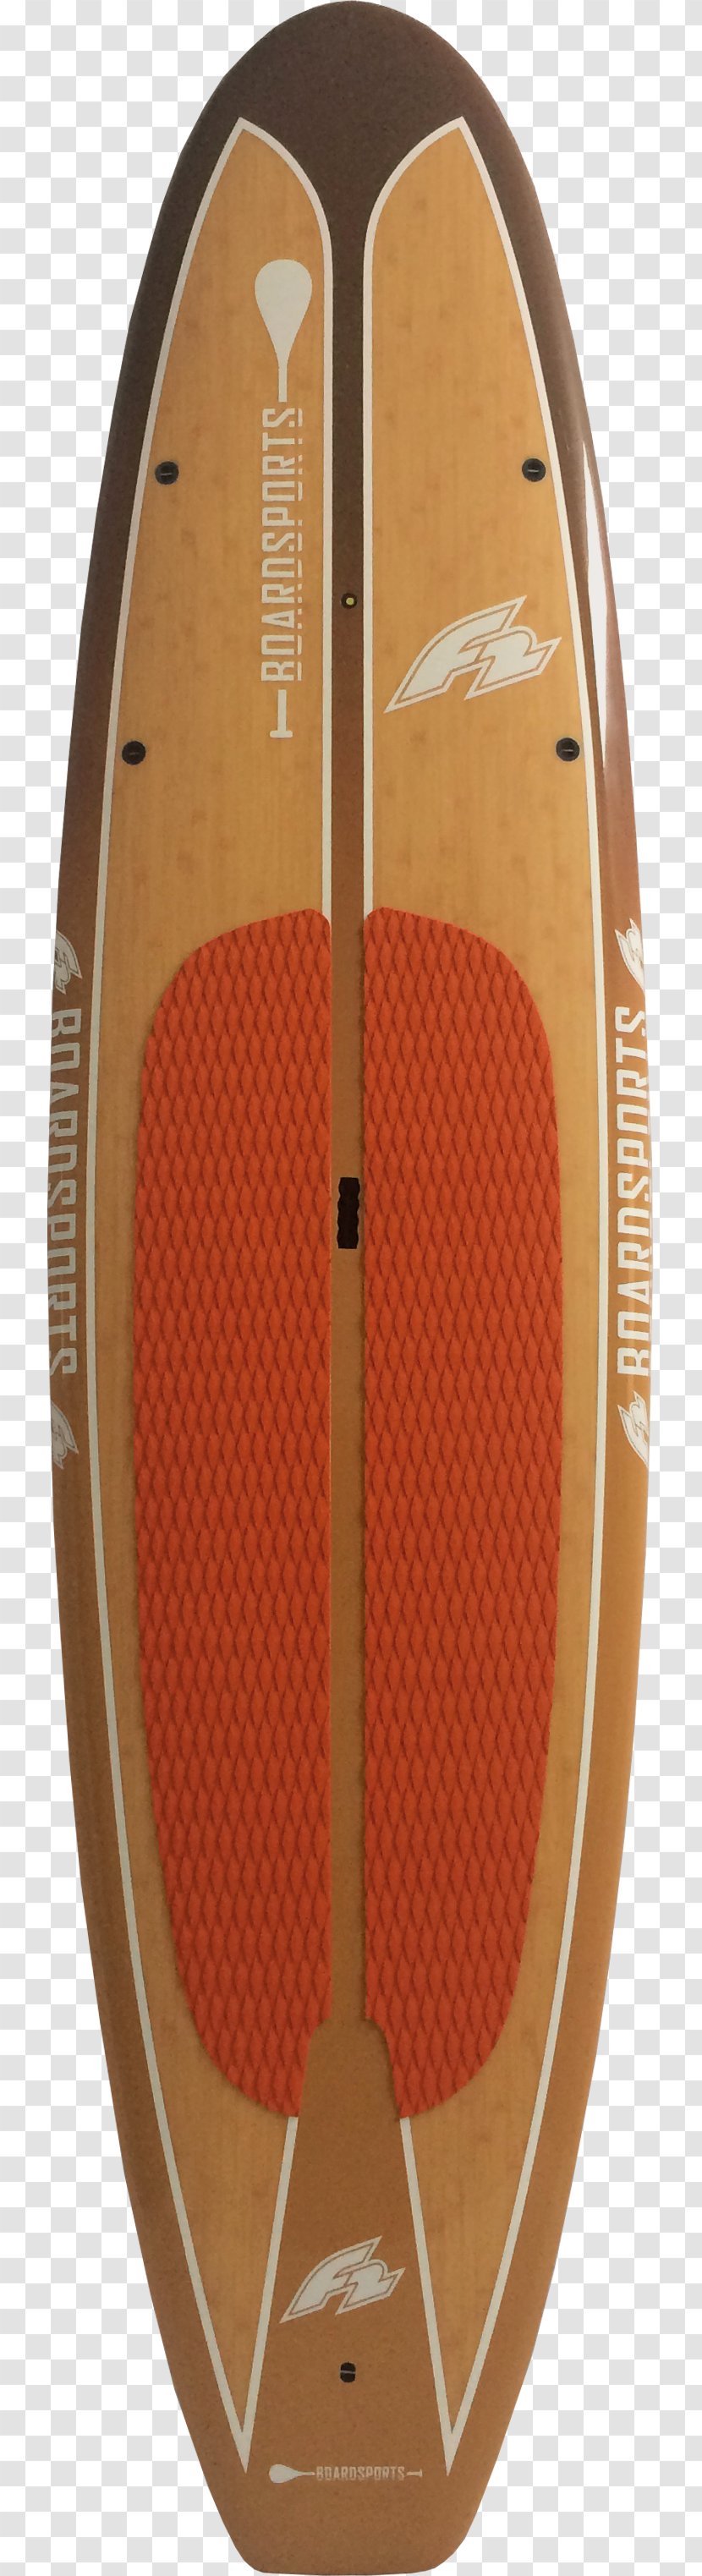 F2 Standup Paddleboarding Tropical Woody Bamboos Windsurfing Snowboard - News - Industrial Design Transparent PNG